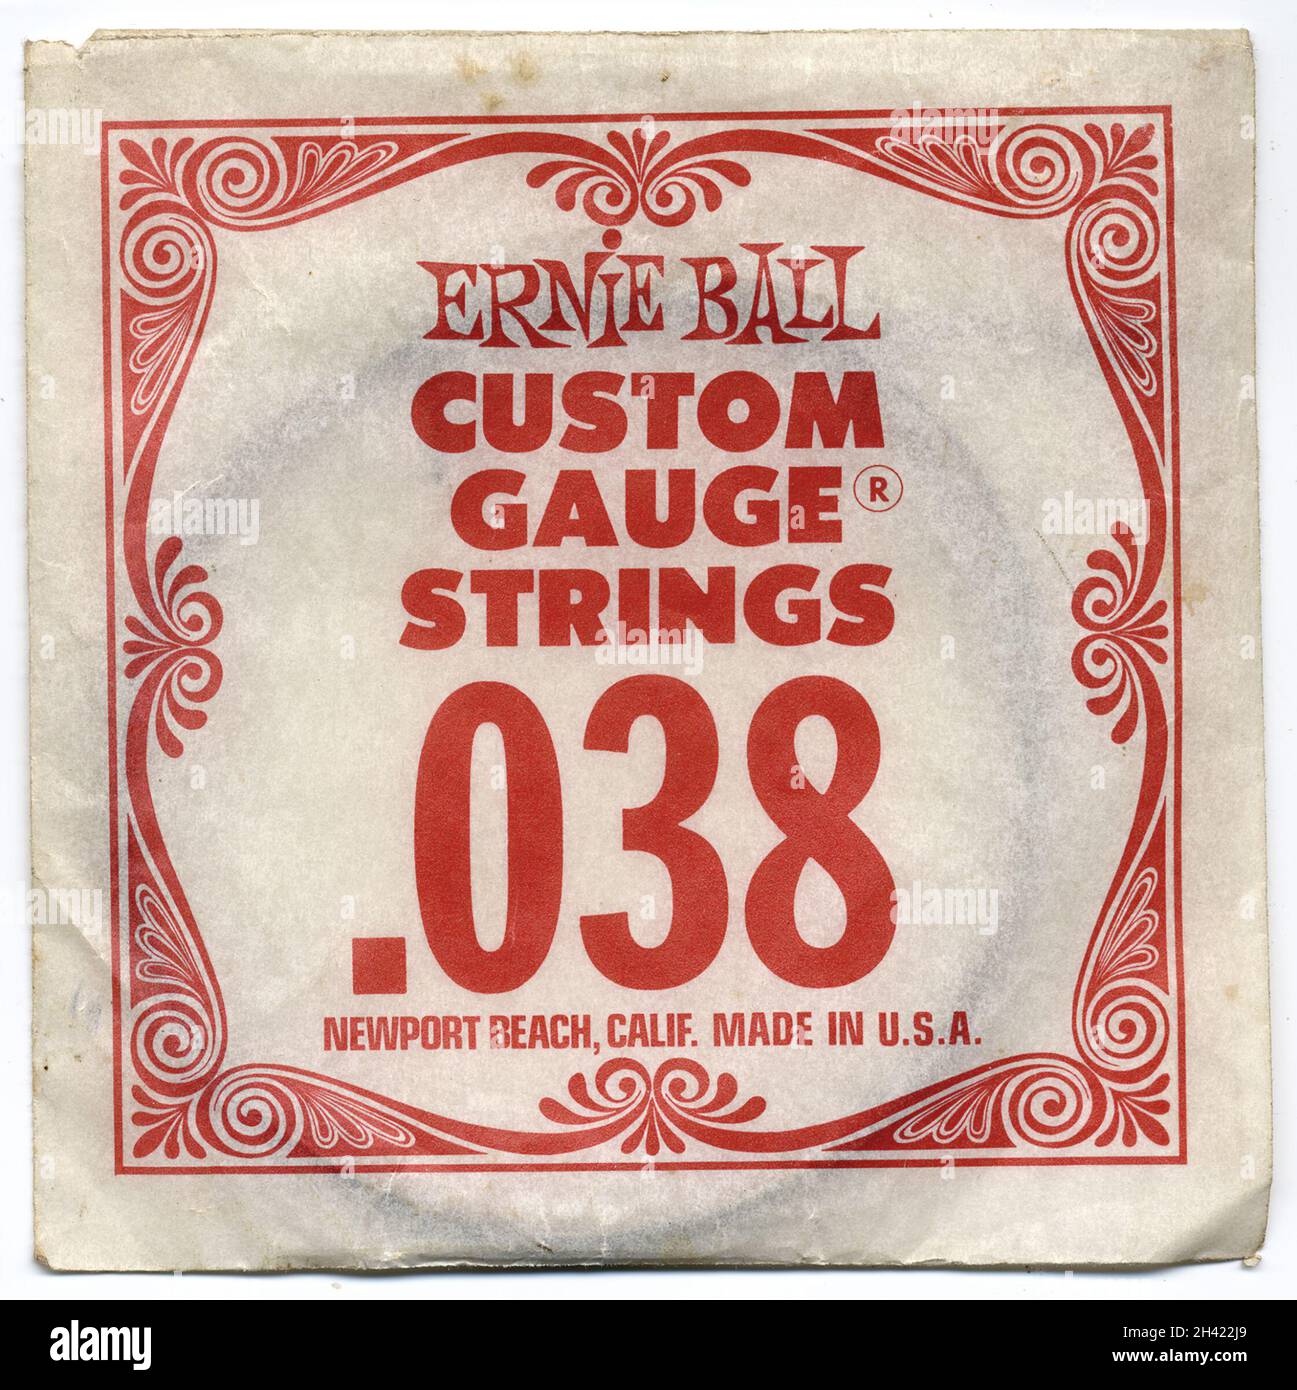 A packet of Ernie Ball custom gauge guitar strings from USA.  Famous Ernie Ball logo on packet.  Rock and roll memorabilia. Stock Photo